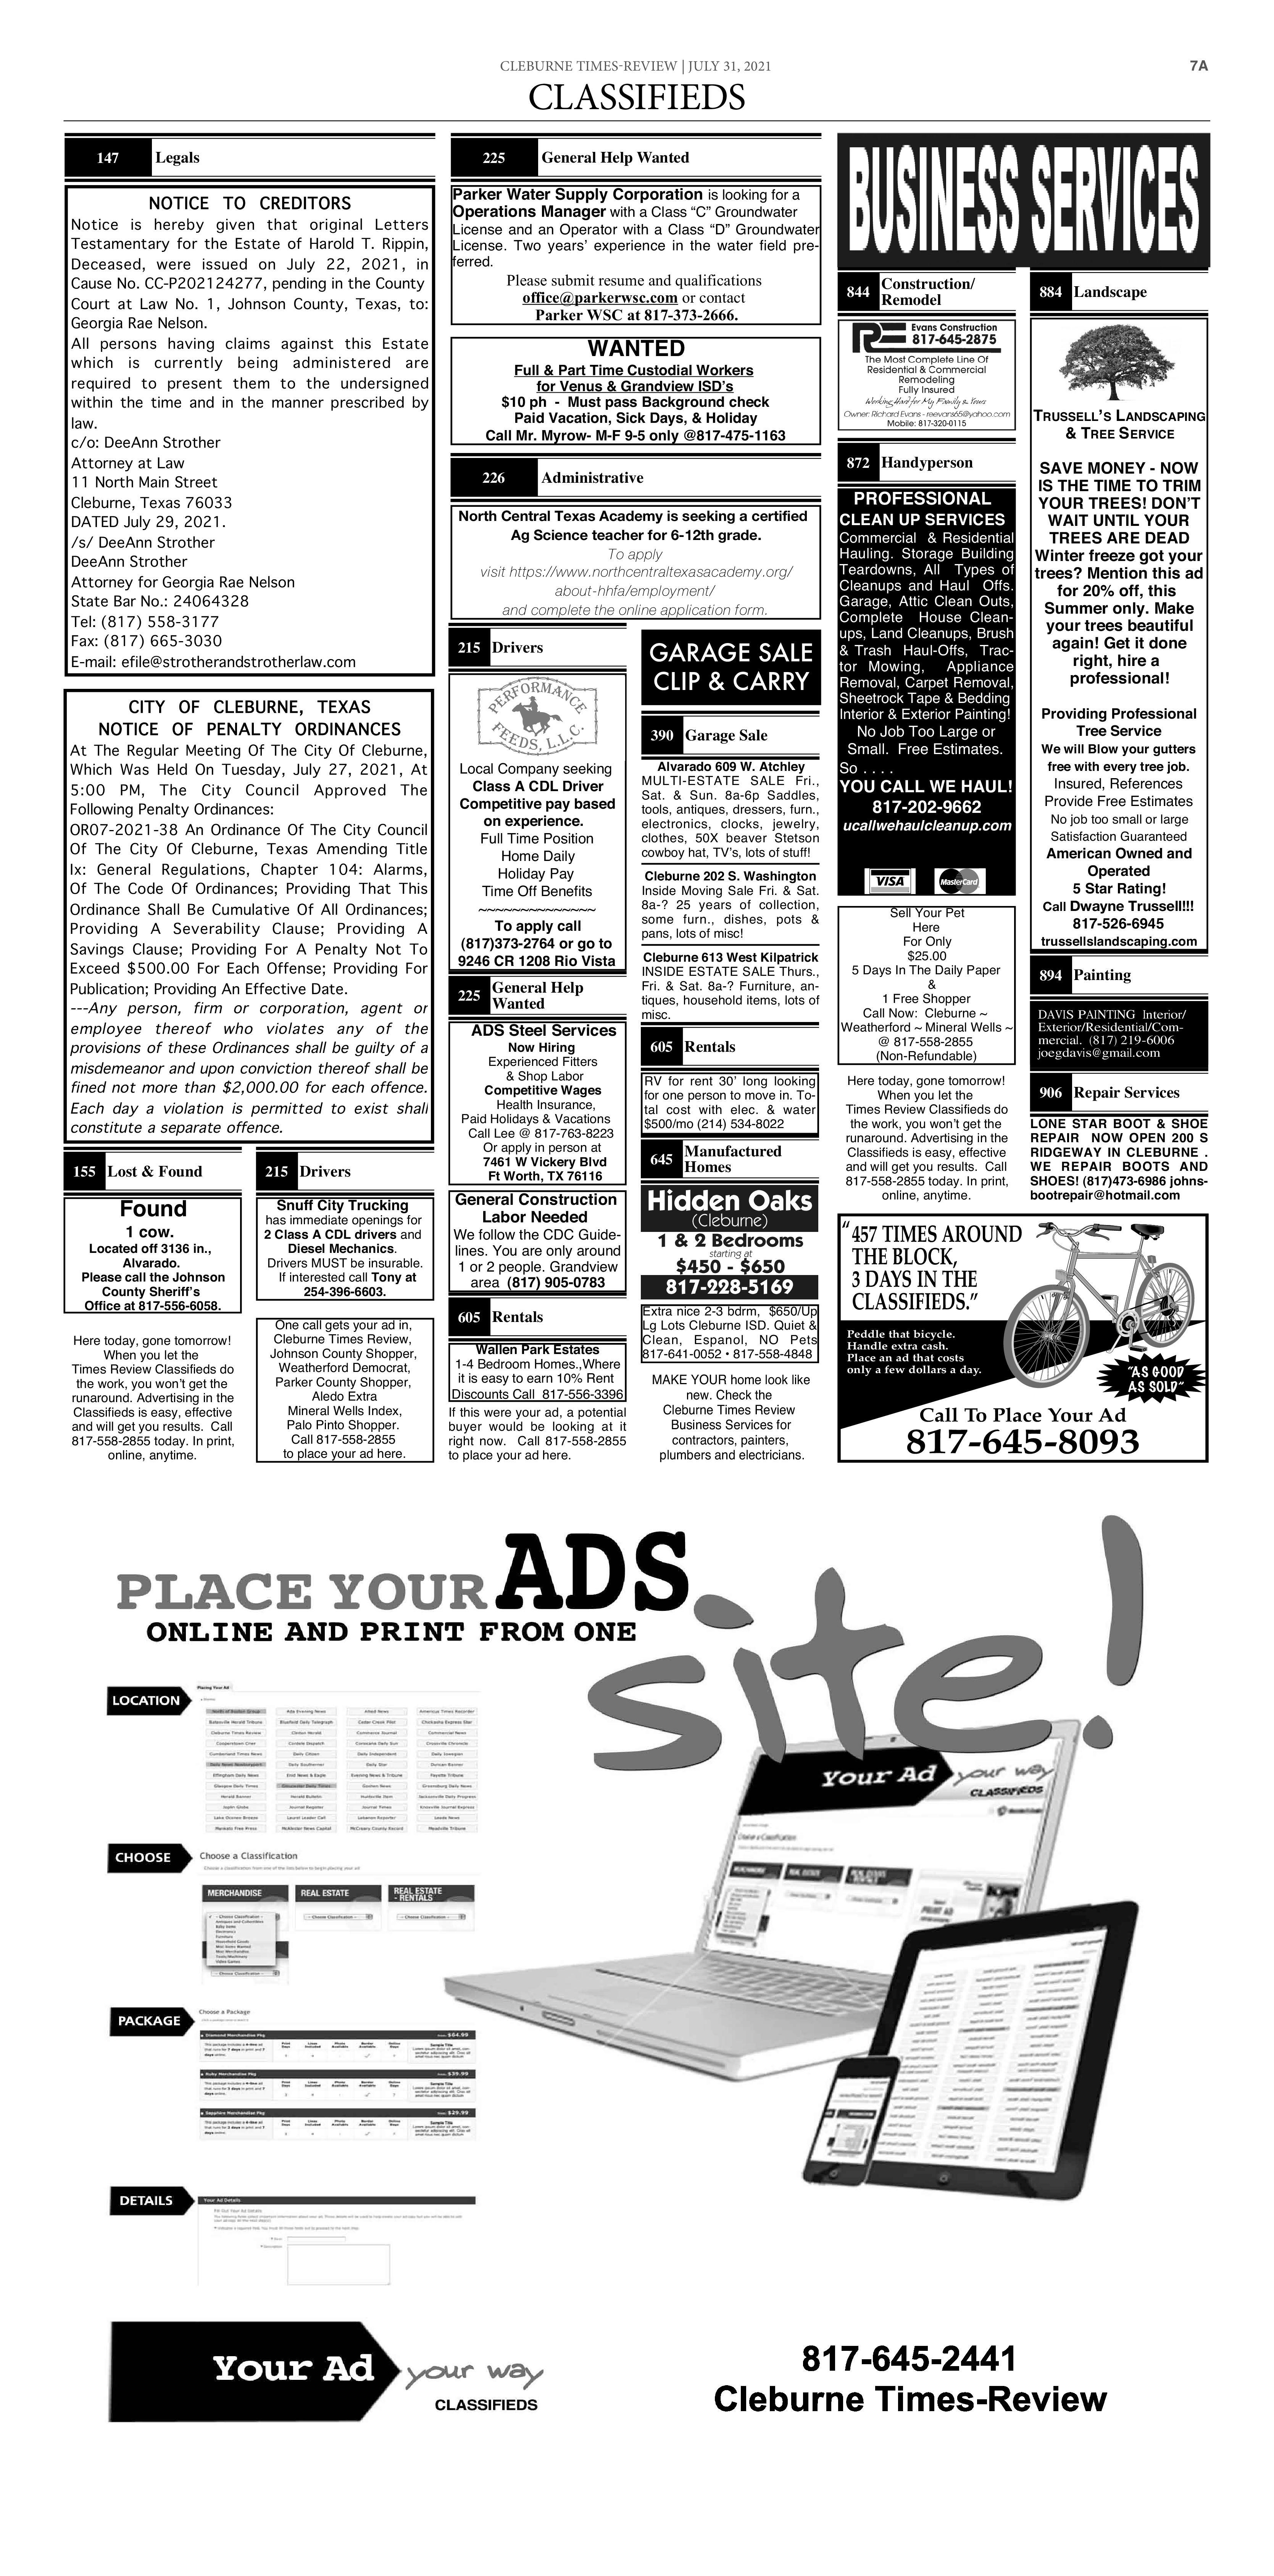 Cleburne Times Review Newspaper Ads Classifieds Announcements City Of Cleburne Texas [ 6750 x 3338 Pixel ]